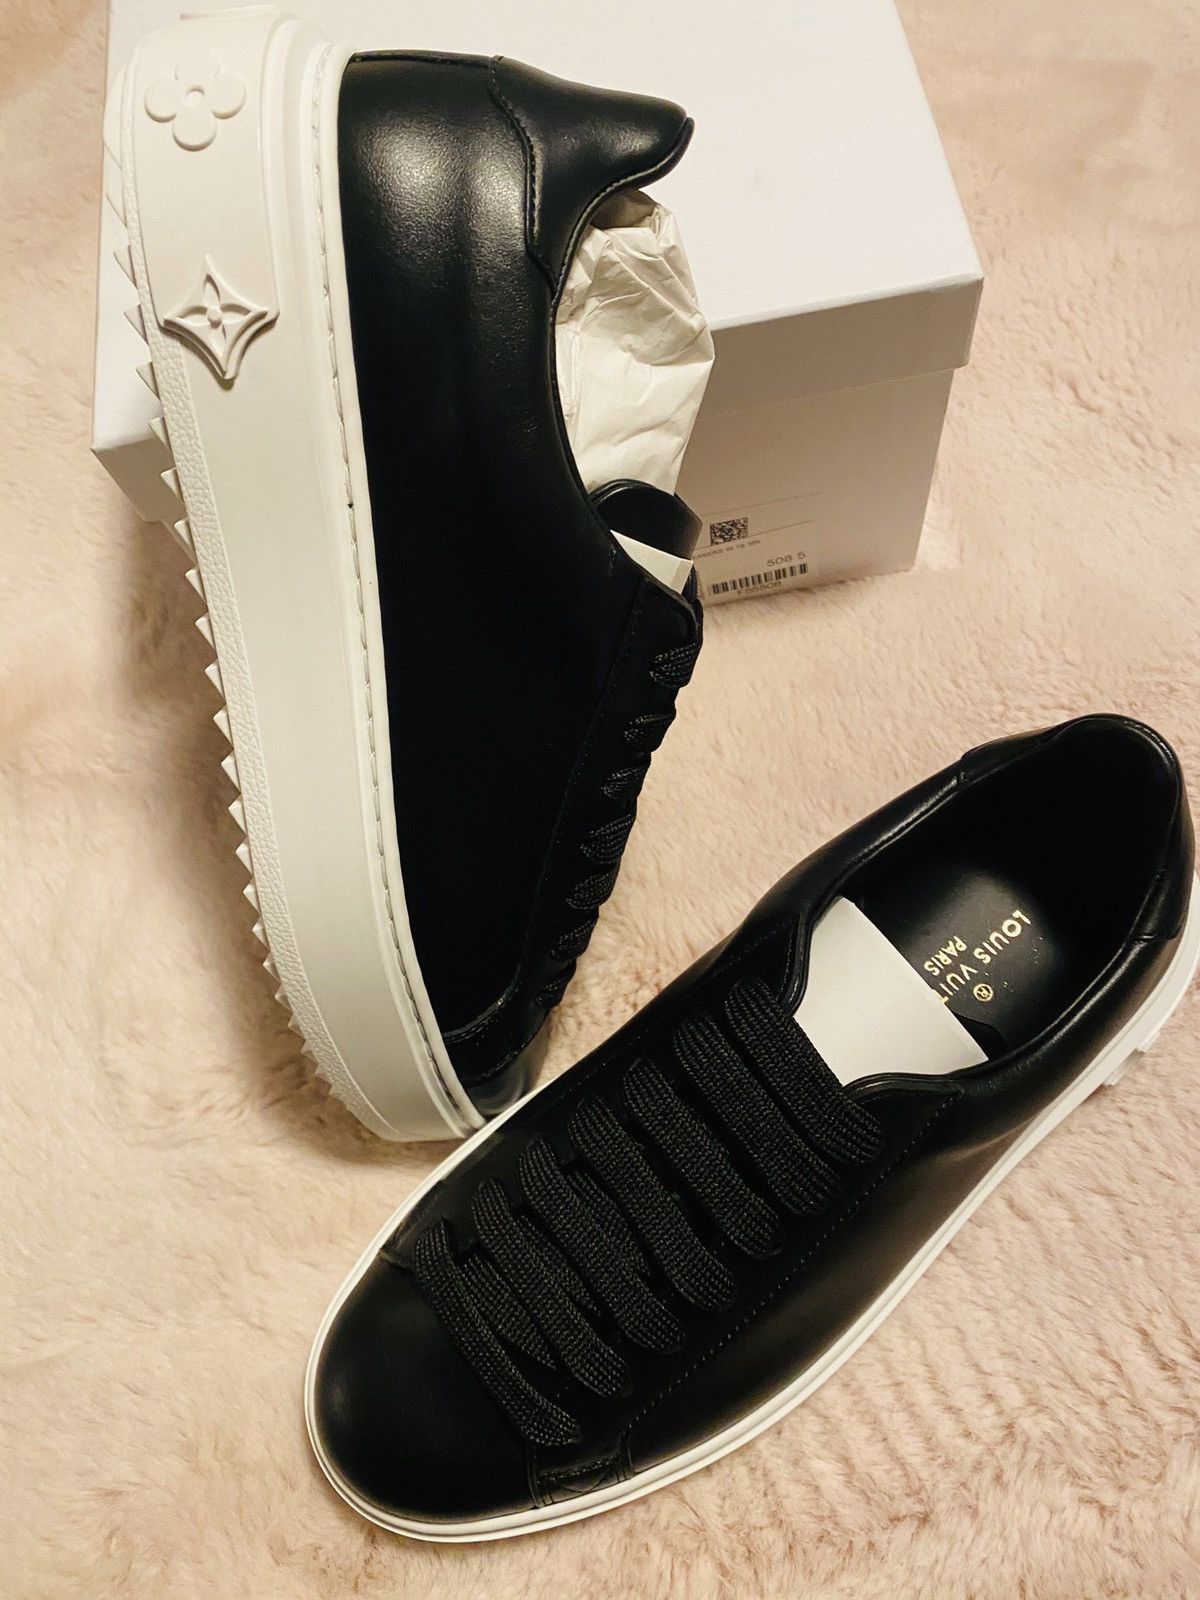 Xxlarge_apparel - 🕊🔞*LOUIS VUITTON TIME-OUT SNEAKERS